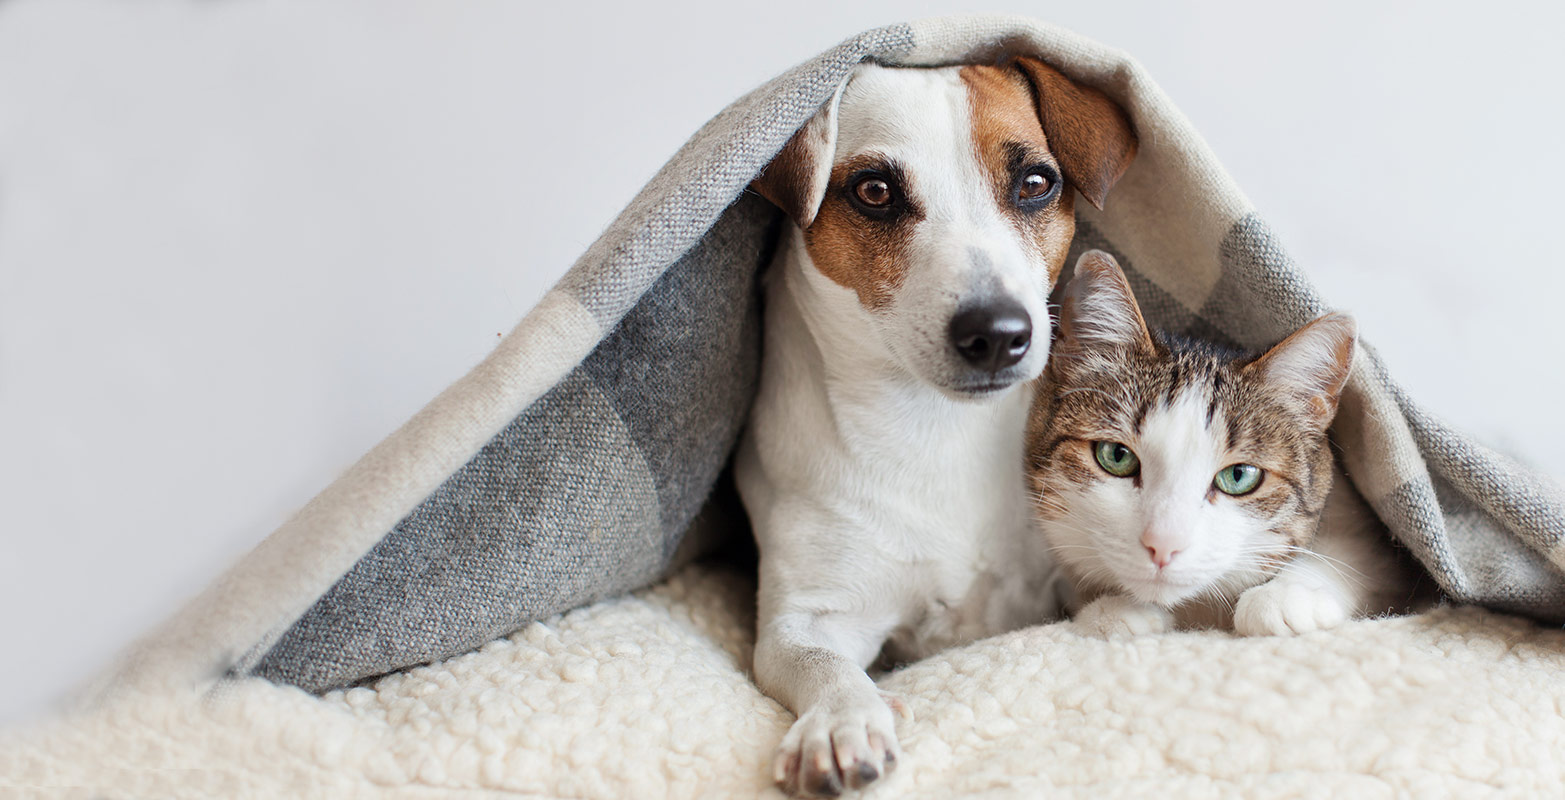 dog and cat protected under a blanket